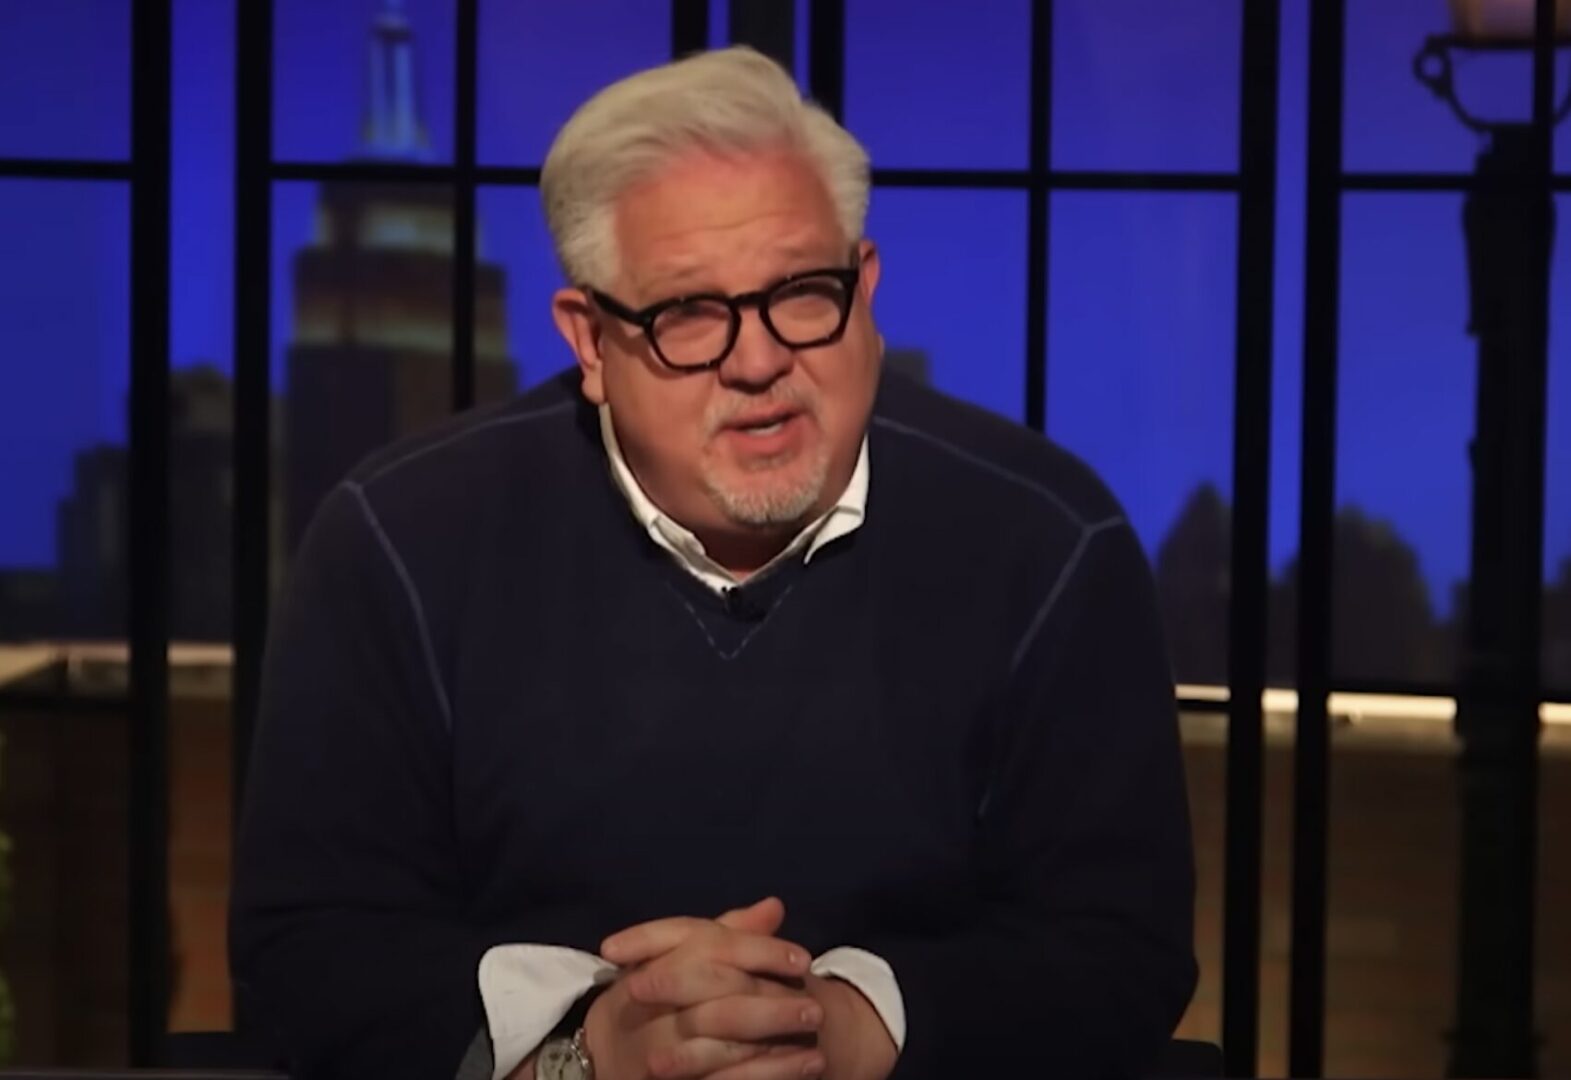 Artificial Intelligence: A Double-Edged Sword for Society, Warns Glenn Beck